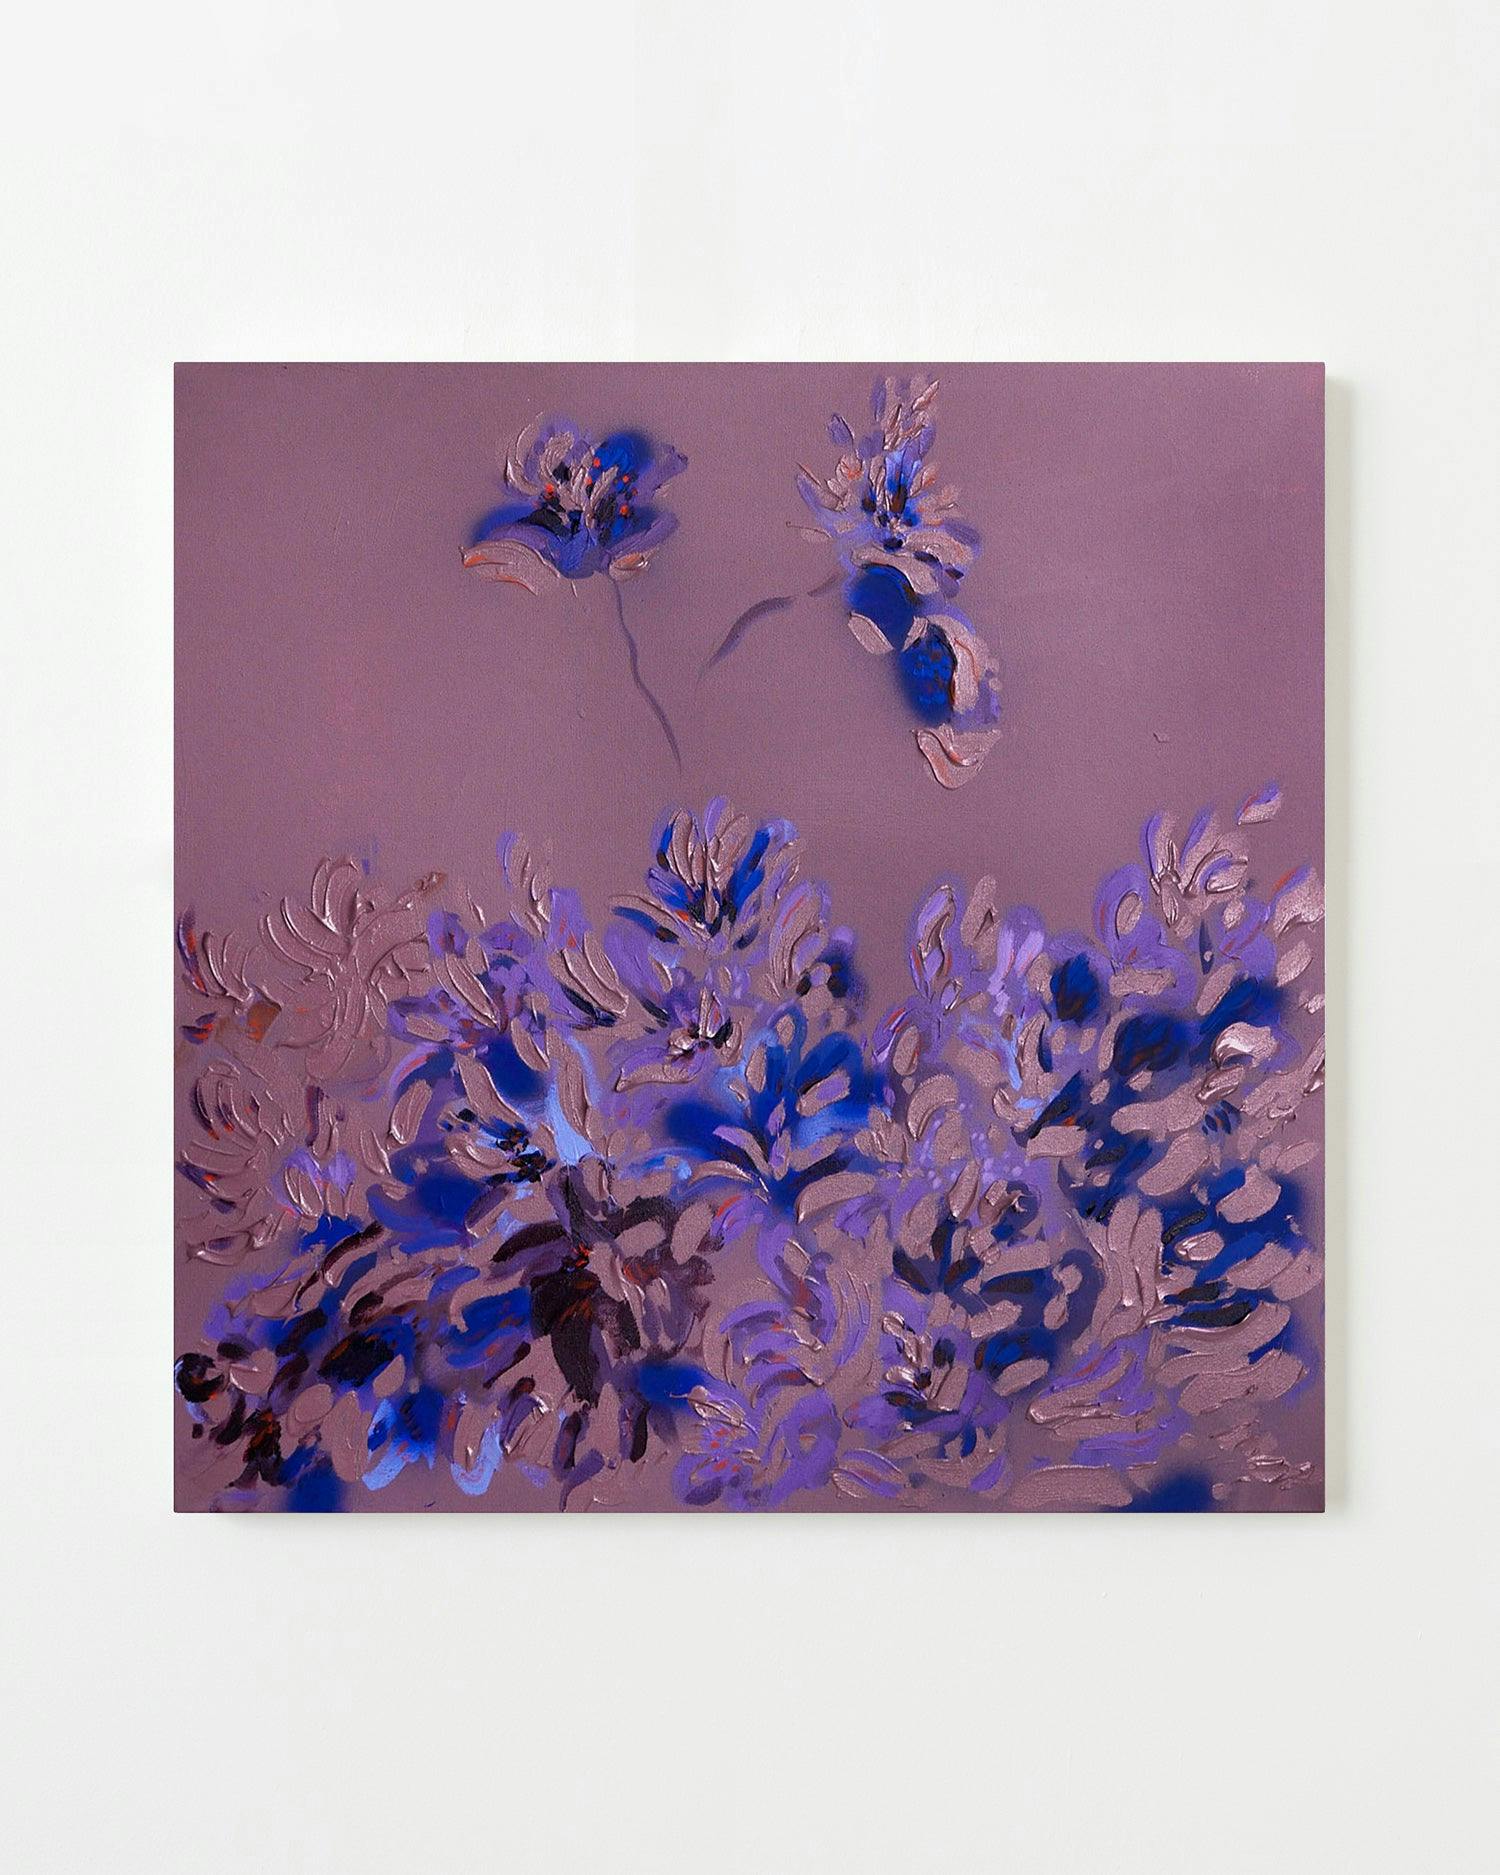 Painting by Erin Lynn Welsh titled "Botany Mono 81".